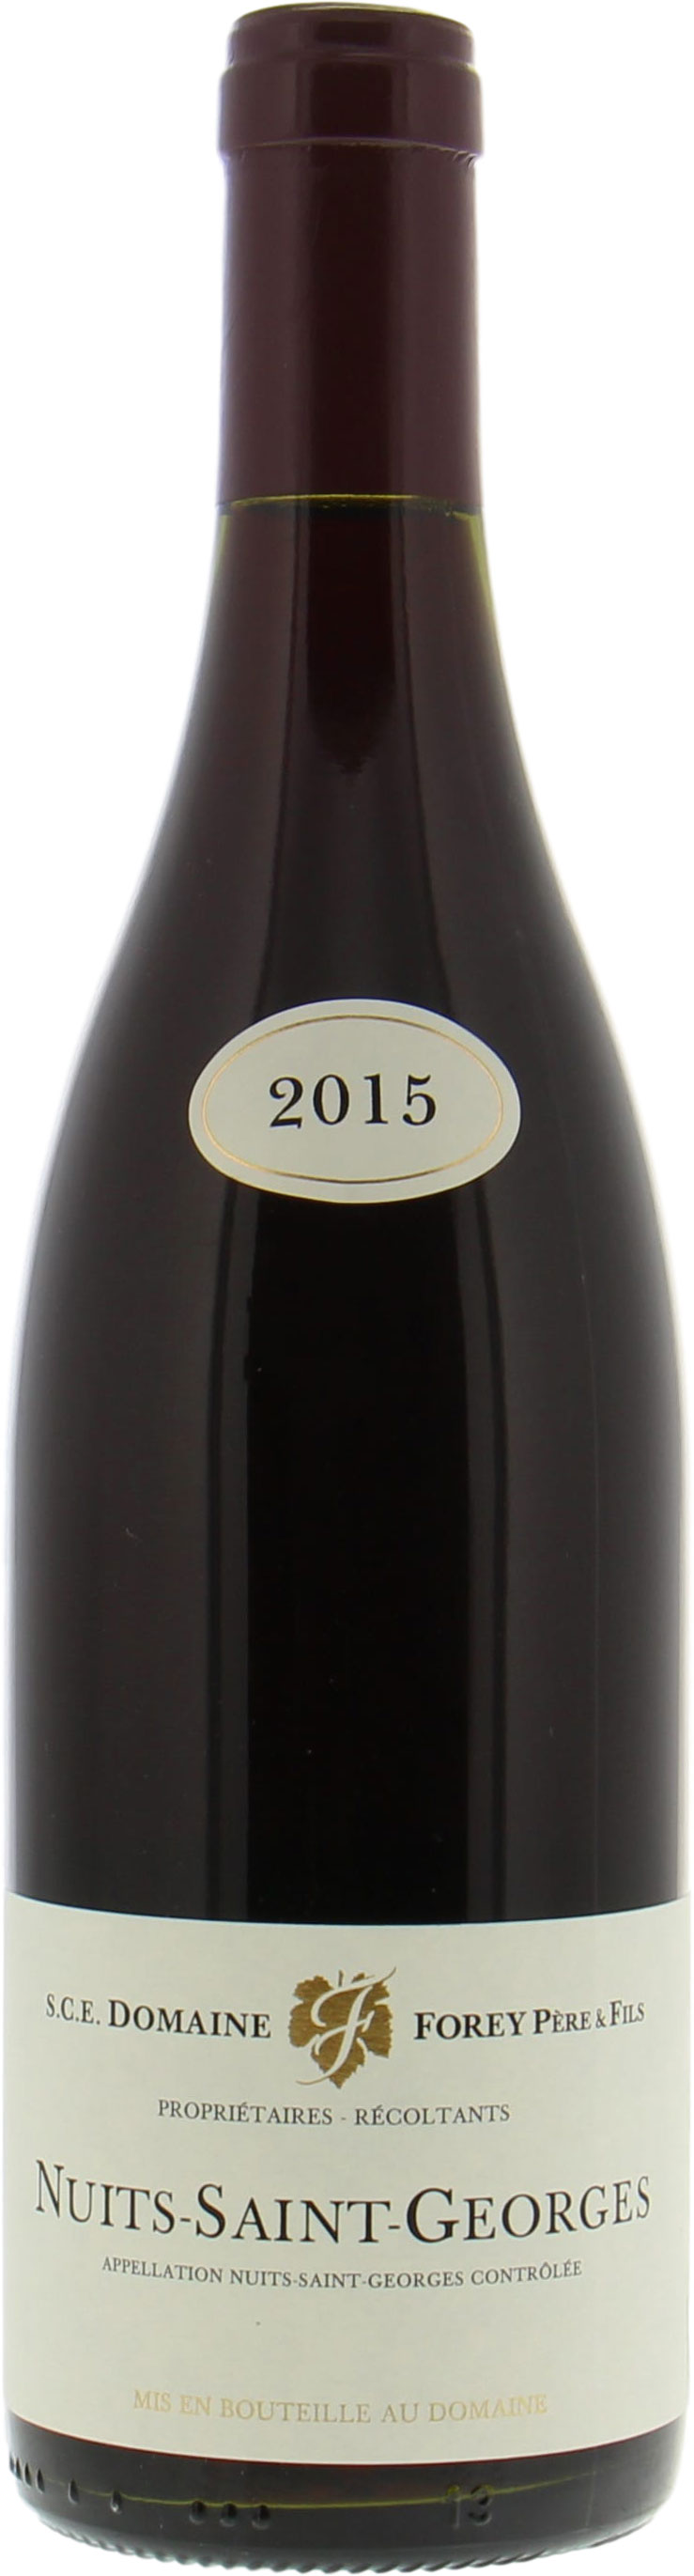 Domaine Forey Pere & Fils - Nuits St. Georges 2015 Perfect